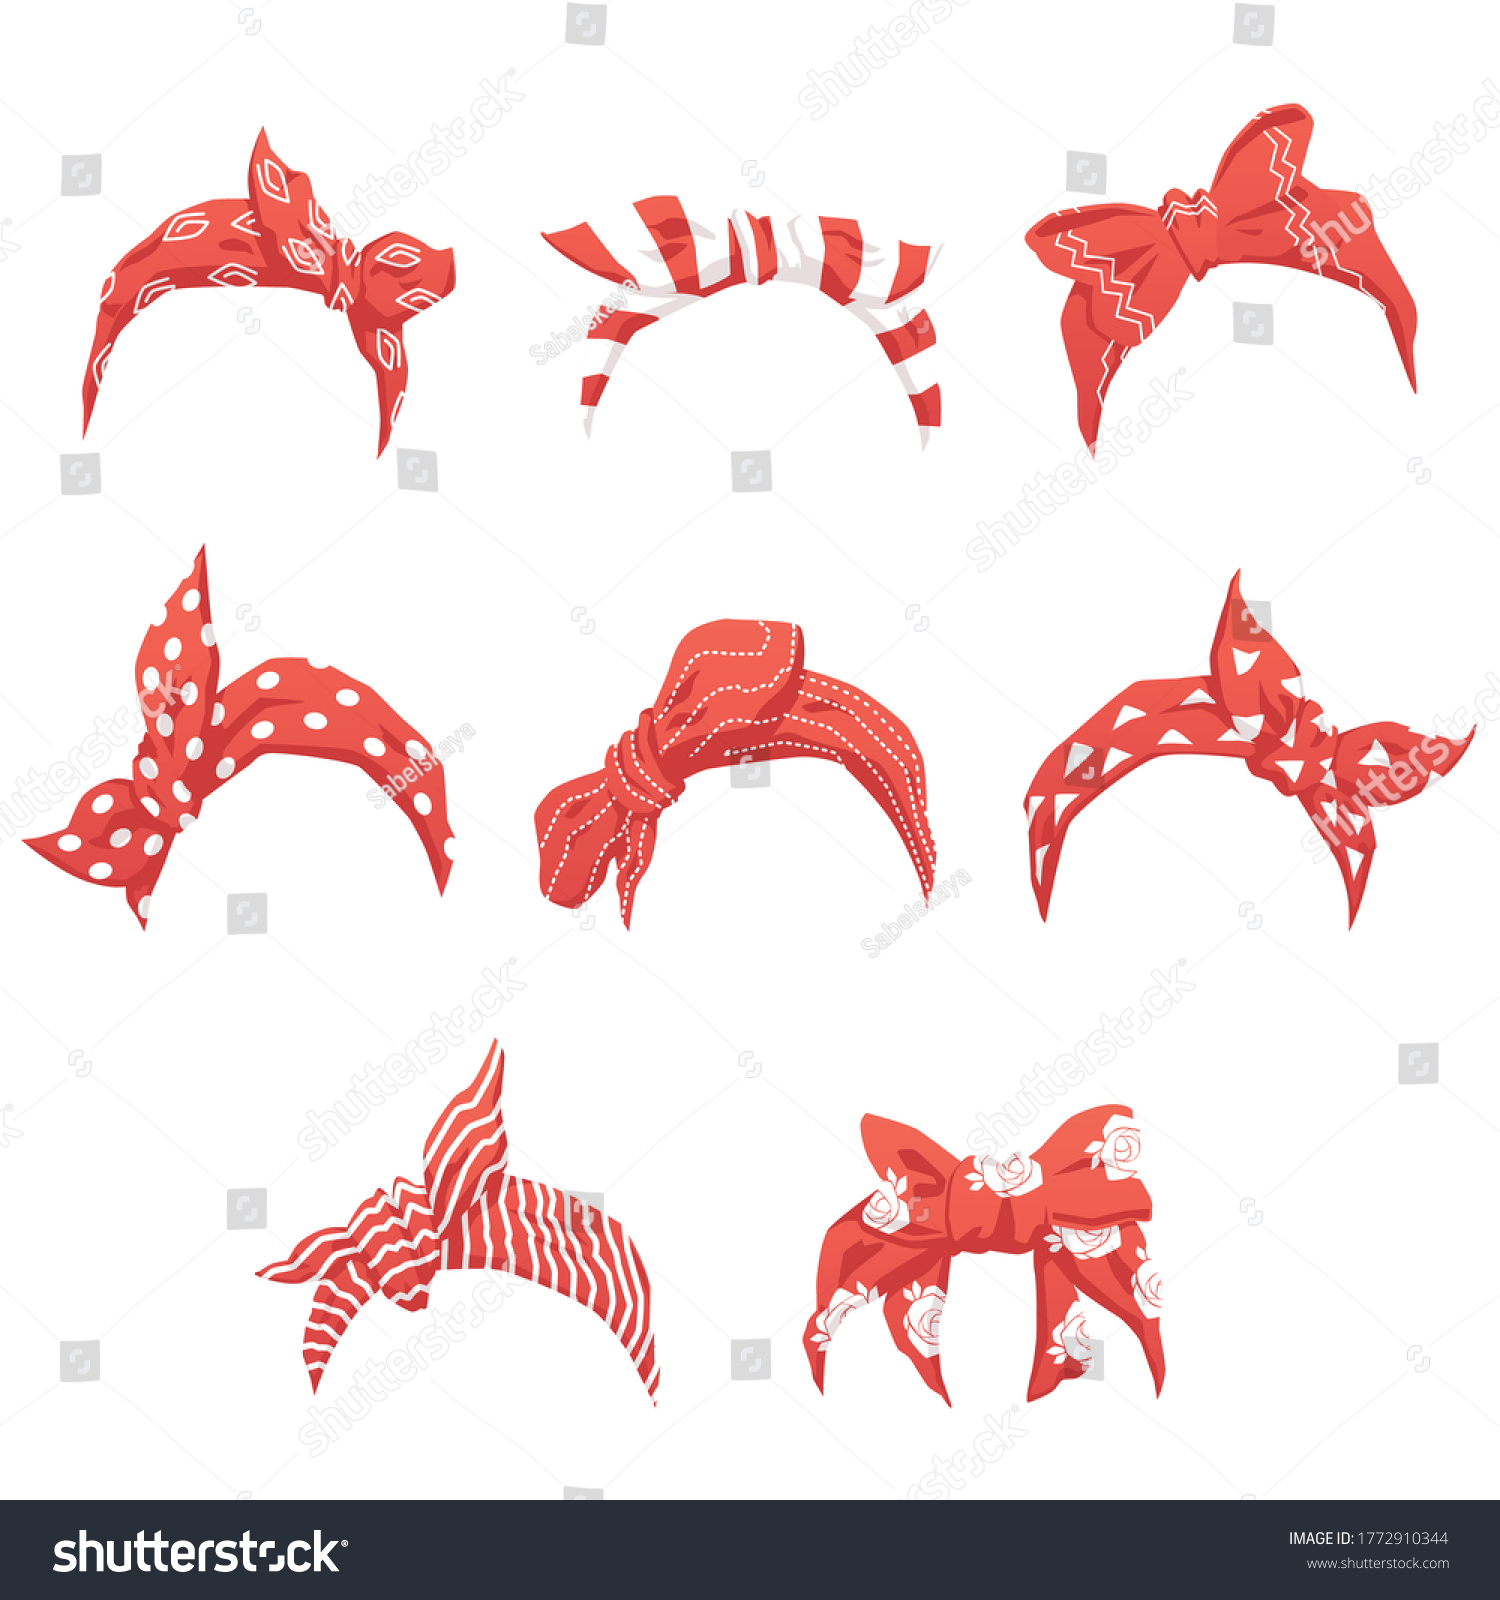 SVG of Set of retro red headband or bandana for women, realistic vector illustration isolated on white background. Mockups of decorative hair knotted vintage scarves. svg